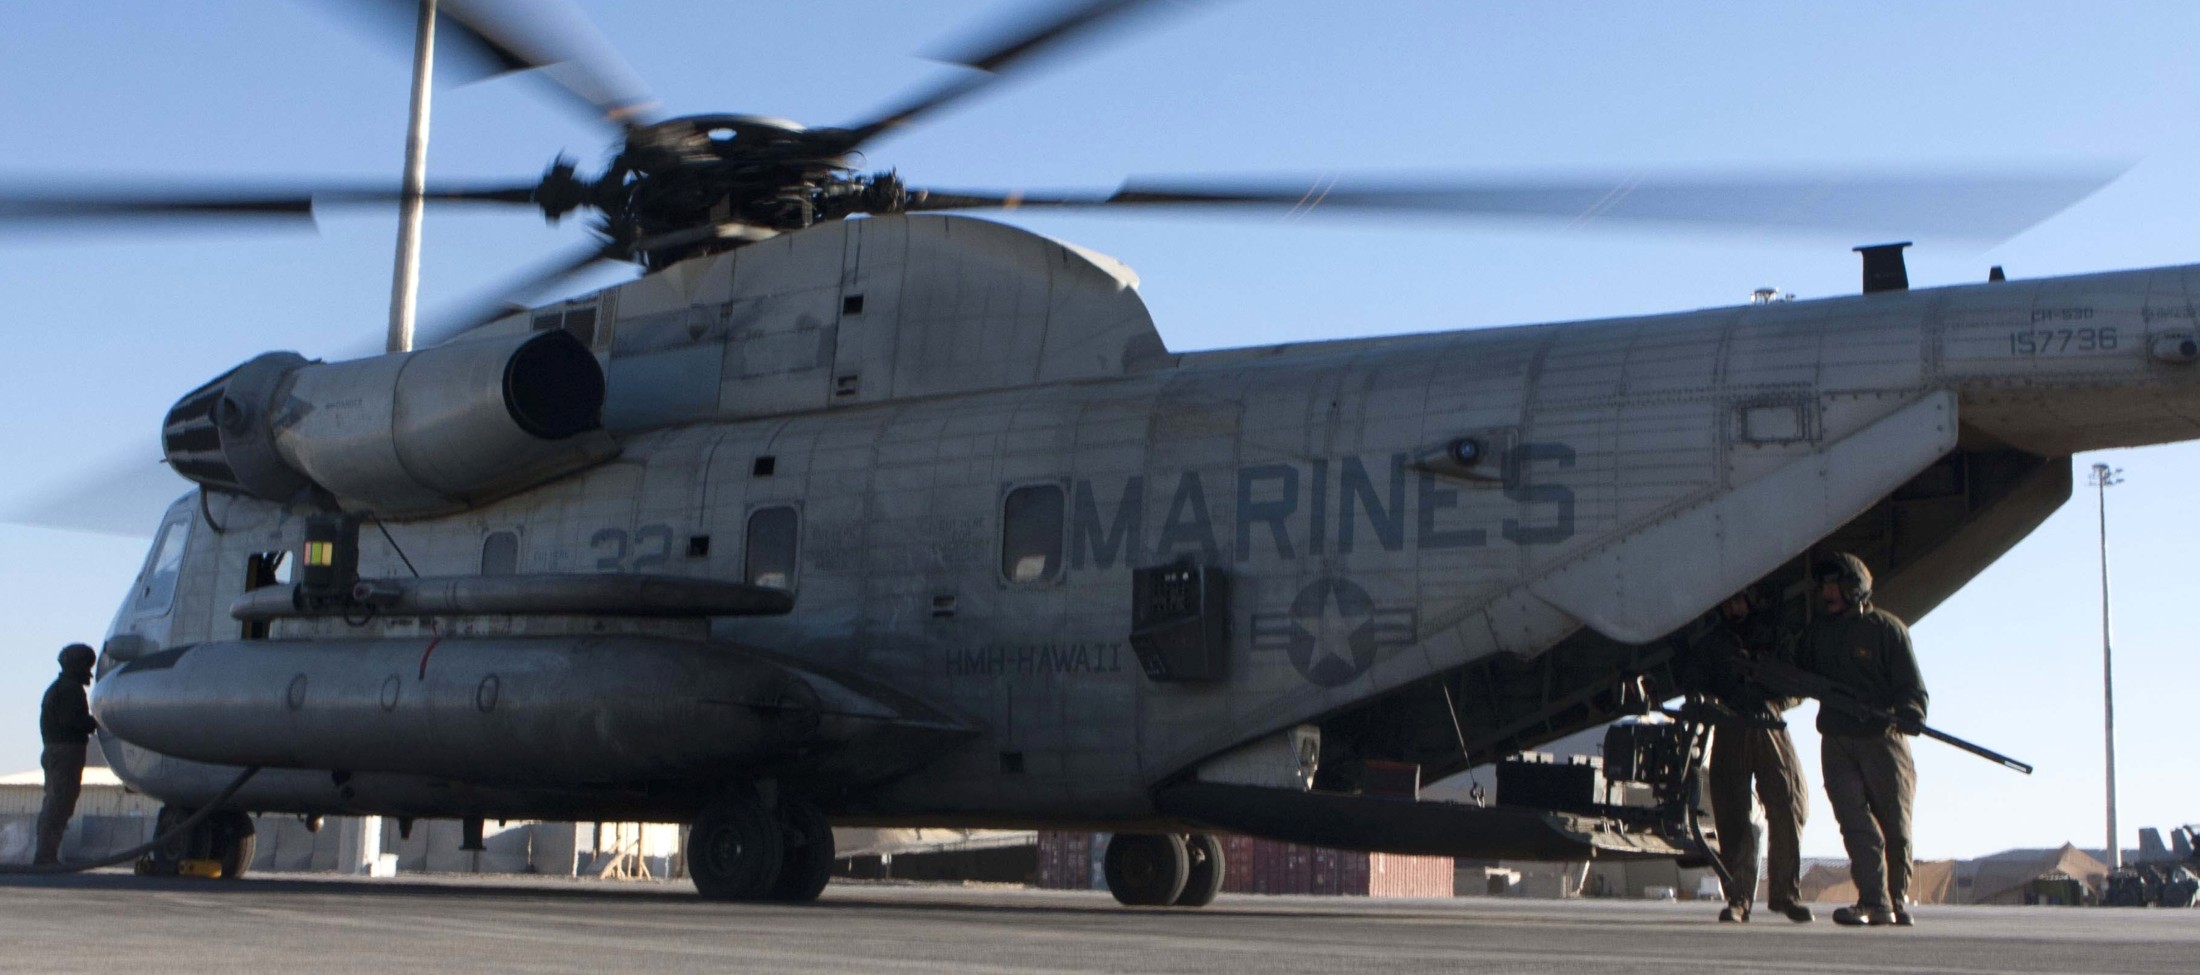 hmh-363 red lions marine heavy helicopter squadron usmc sikorsky ch-53d sea stallion 36 camp bastion afghanistan